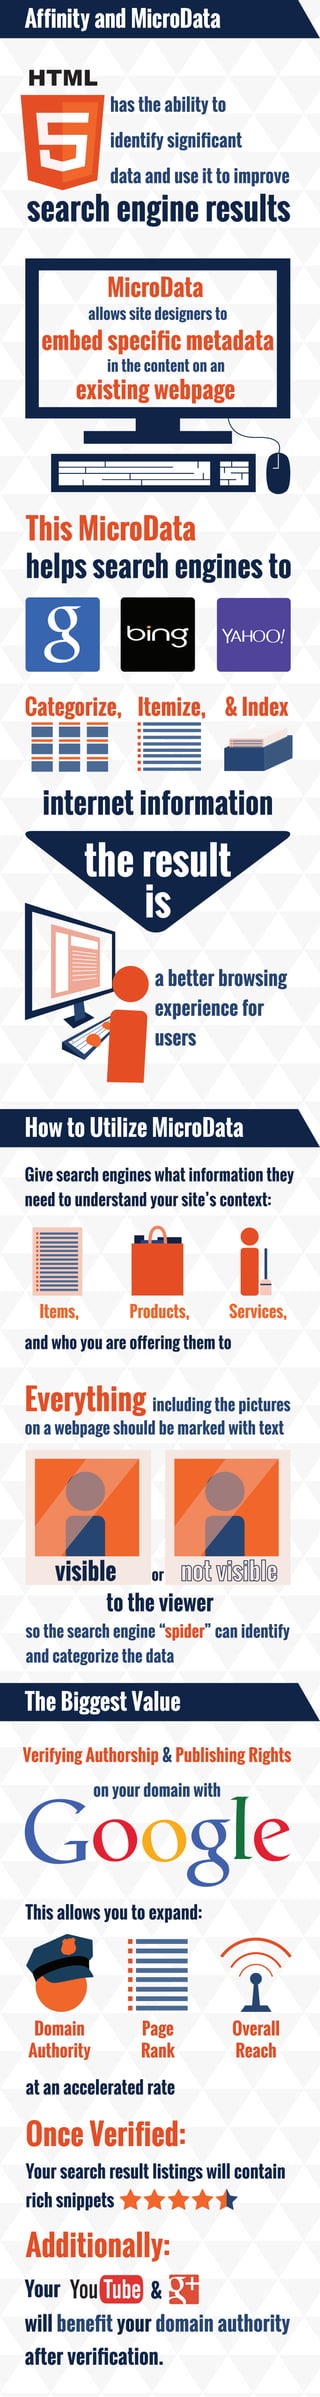 Affinity and MicroData
How to Utilize MicroData
The Biggest Value
has the ability to
identify signiﬁcant
data and use it to improve
MicroData
embed speciﬁc metadata
existing webpage
allows site designers to
in the content on an
search engine results
This MicroData
helps search engines to
internet information
Categorize, Itemize, & Index
the result
is
a better browsing
experience for
users
Give search engines what information they
need to understand your site’s context:
and who you are oﬀering them to
including the picturesEverything
Items, Products, Services,
on a webpage should be marked with text
to the viewer
so the search engine “spider” can identify
and categorize the data
Verifying Authorship & Publishing Rights
on your domain with
This allows you to expand:
visible or
at an accelerated rate
Your search result listings will contain
rich snippets
will beneﬁt your domain authority
after veriﬁcation.
Your
Once Verif
Additionally:
&
Domain
Authority
Page
Rank
Overall
Reach
ied:
 